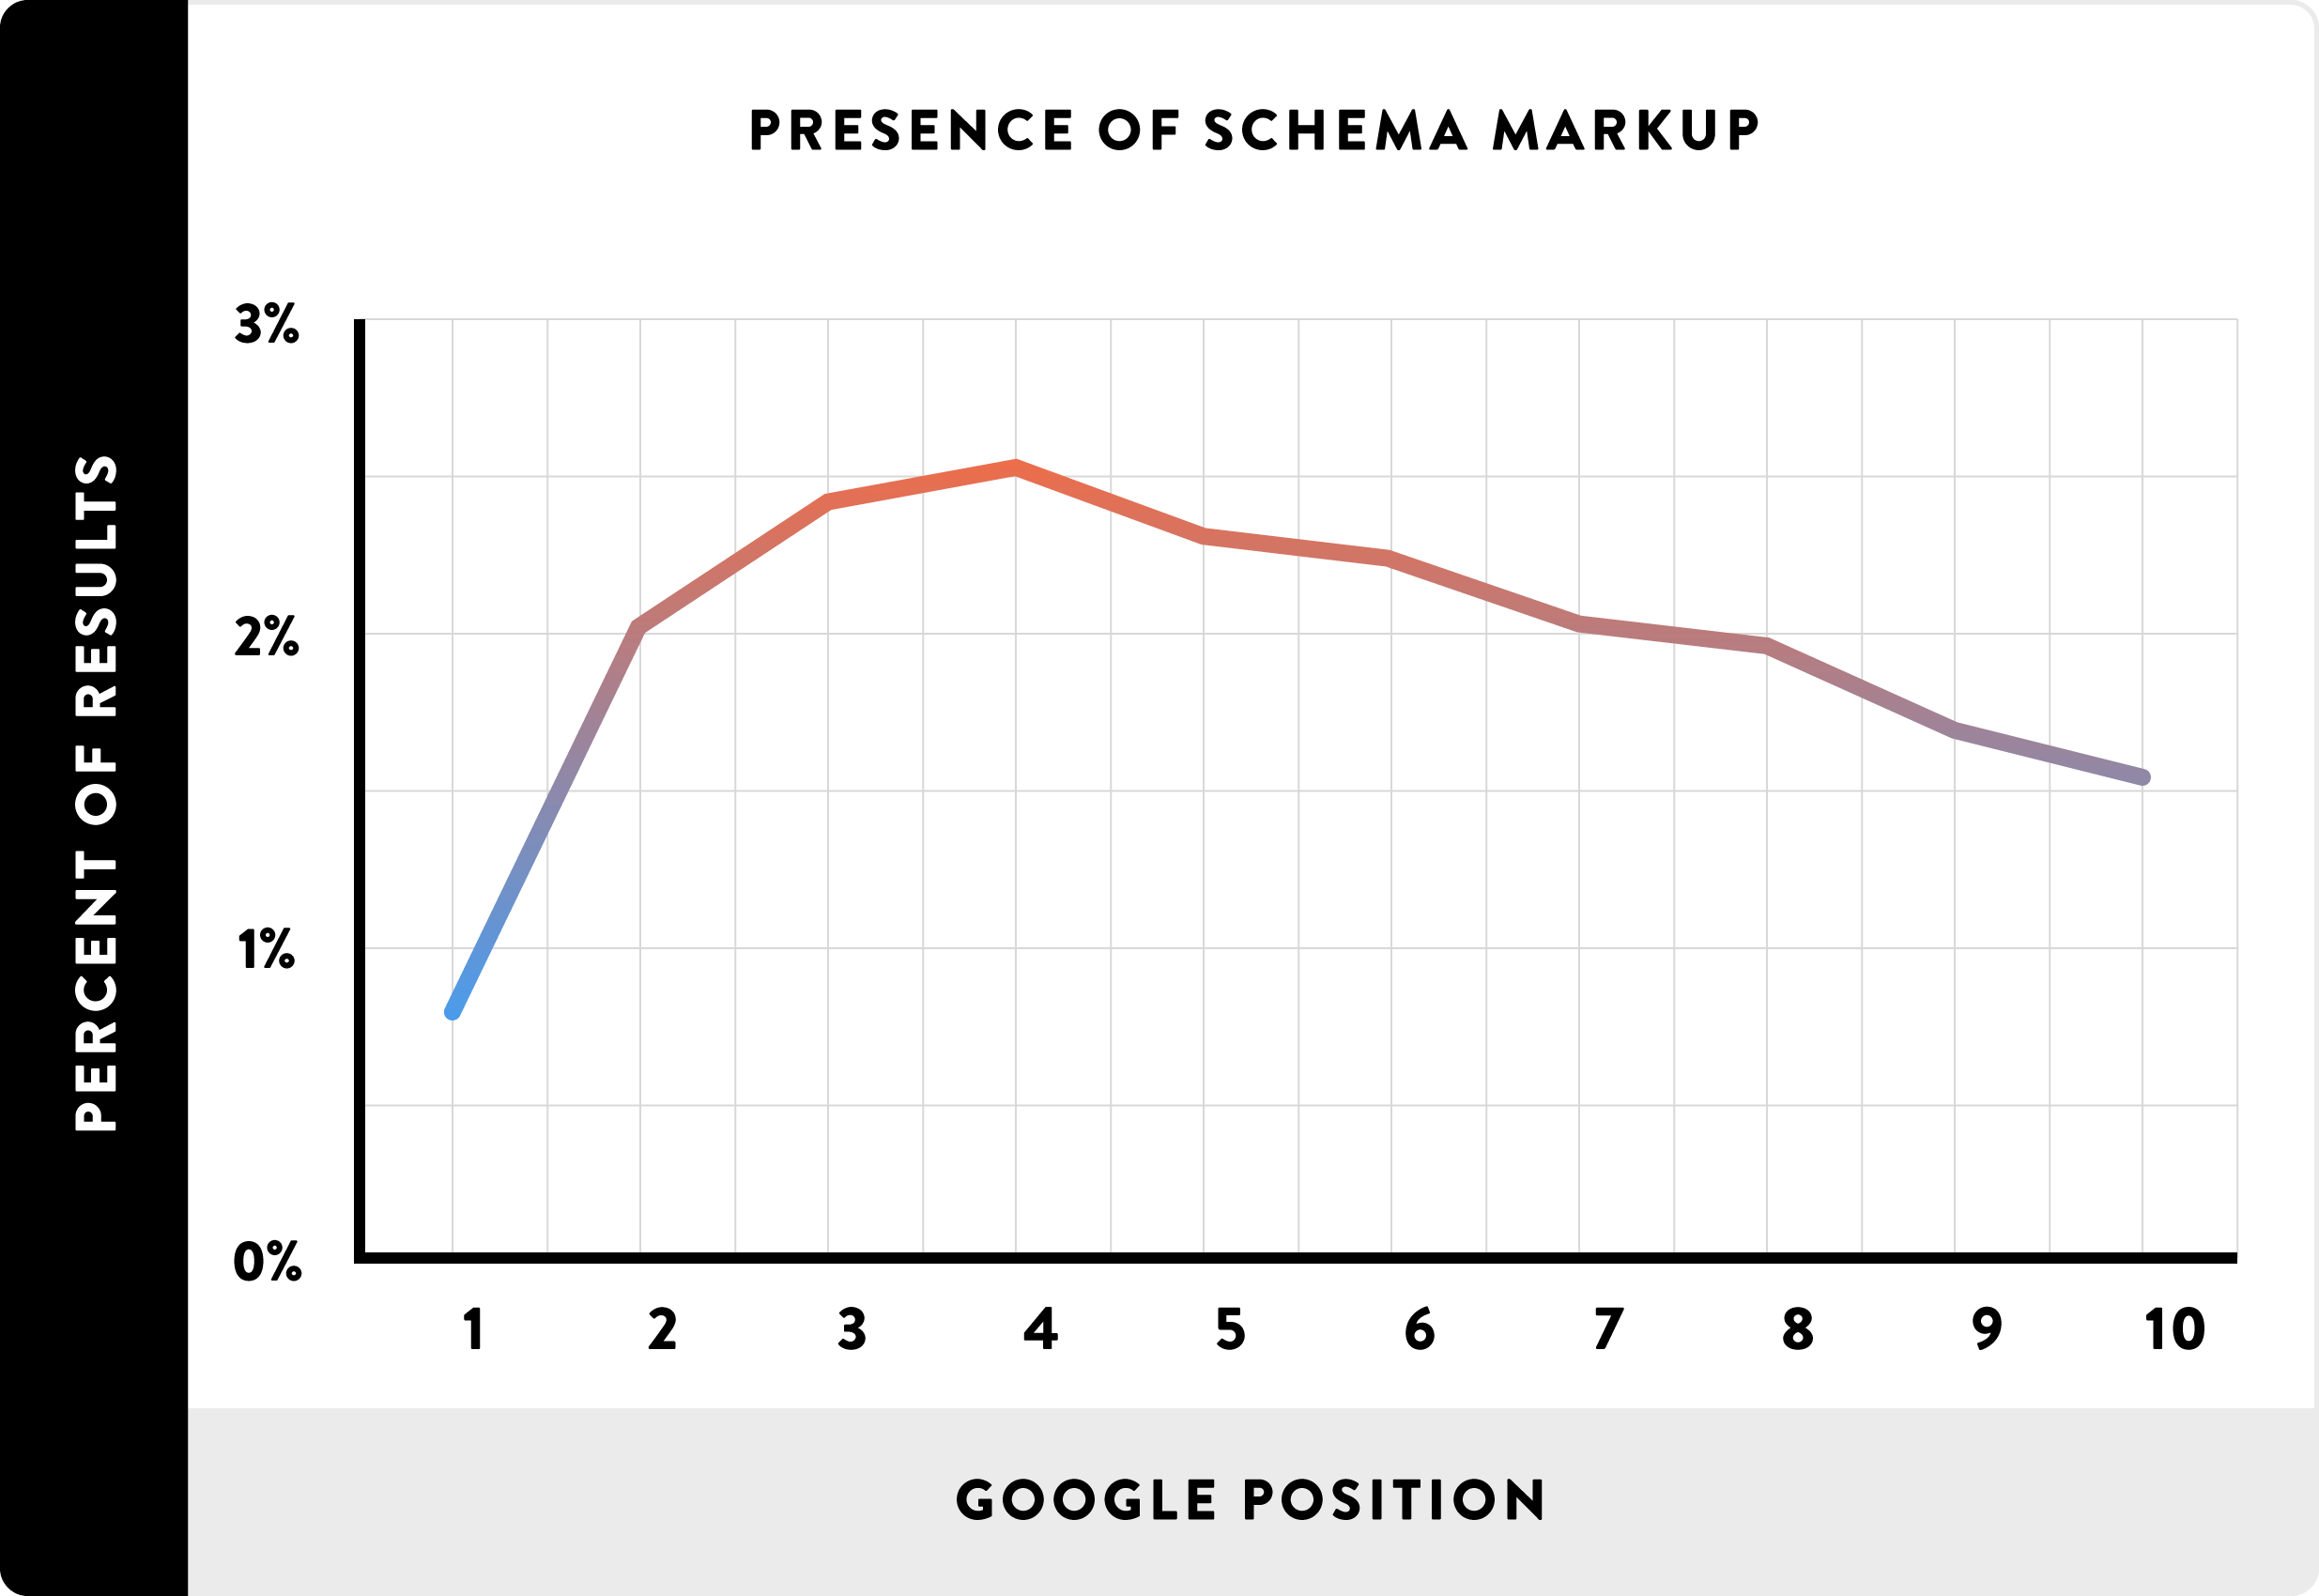 Schema use not correlated with rankings